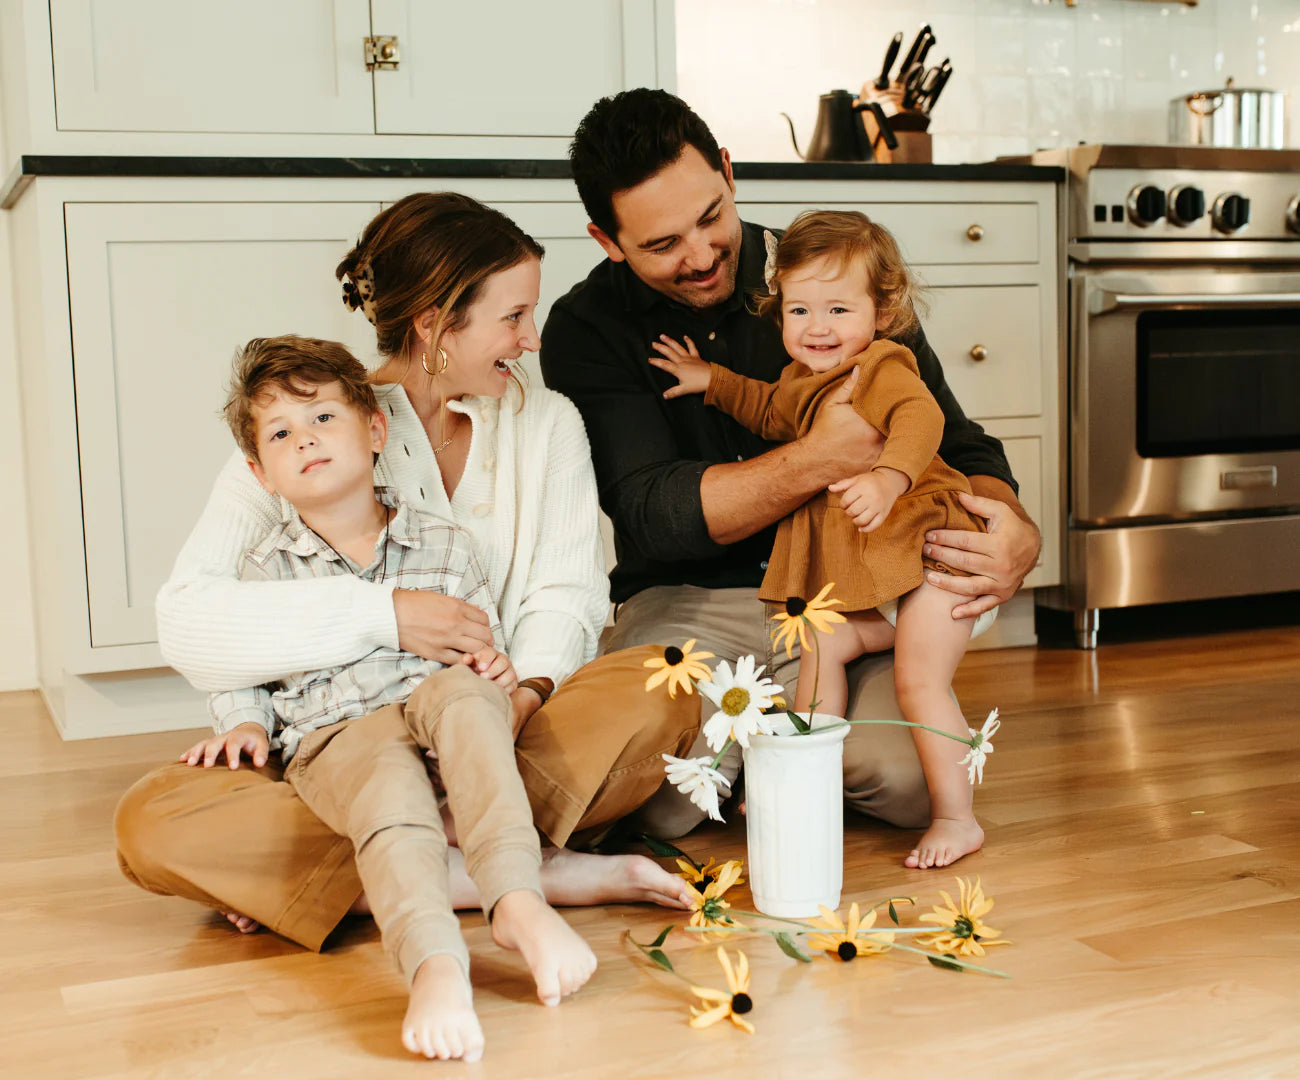 A happy family with two children sitting on the kitchen floor, surrounded by scattered flowers.